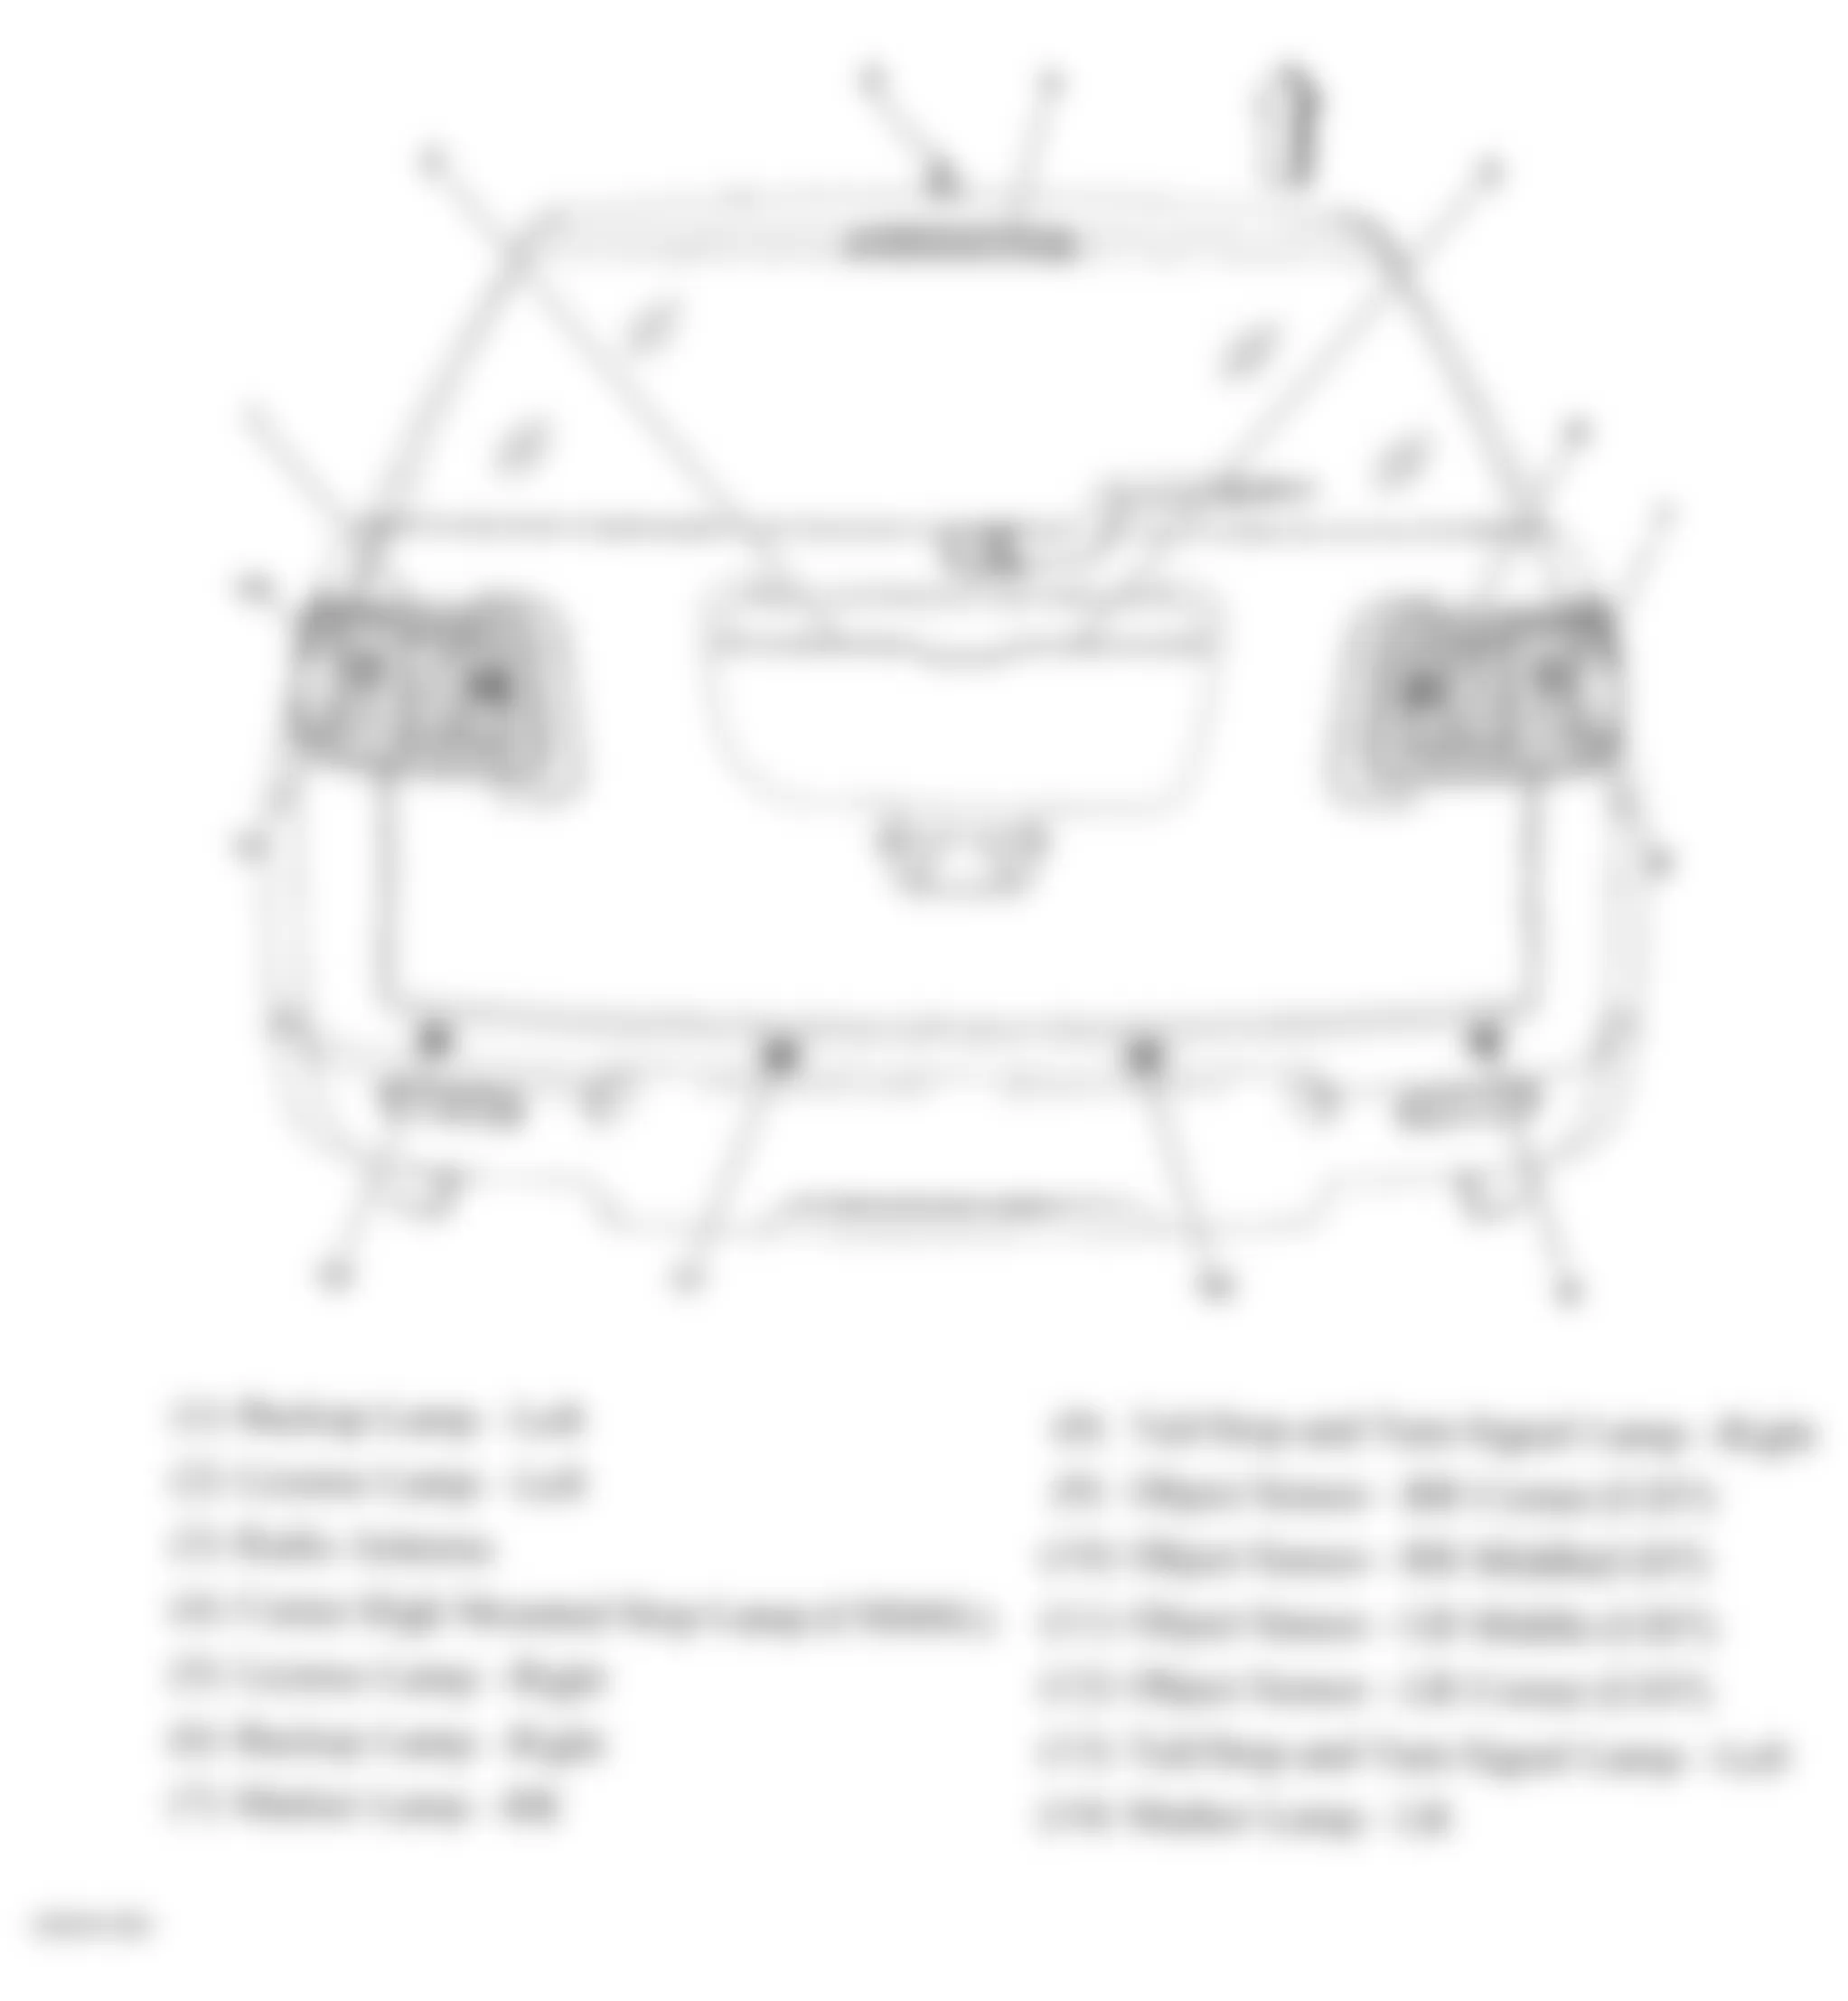 Chevrolet Traverse LTZ 2010 - Component Locations -  Rear Of Vehicle (Acadia & Outlook)